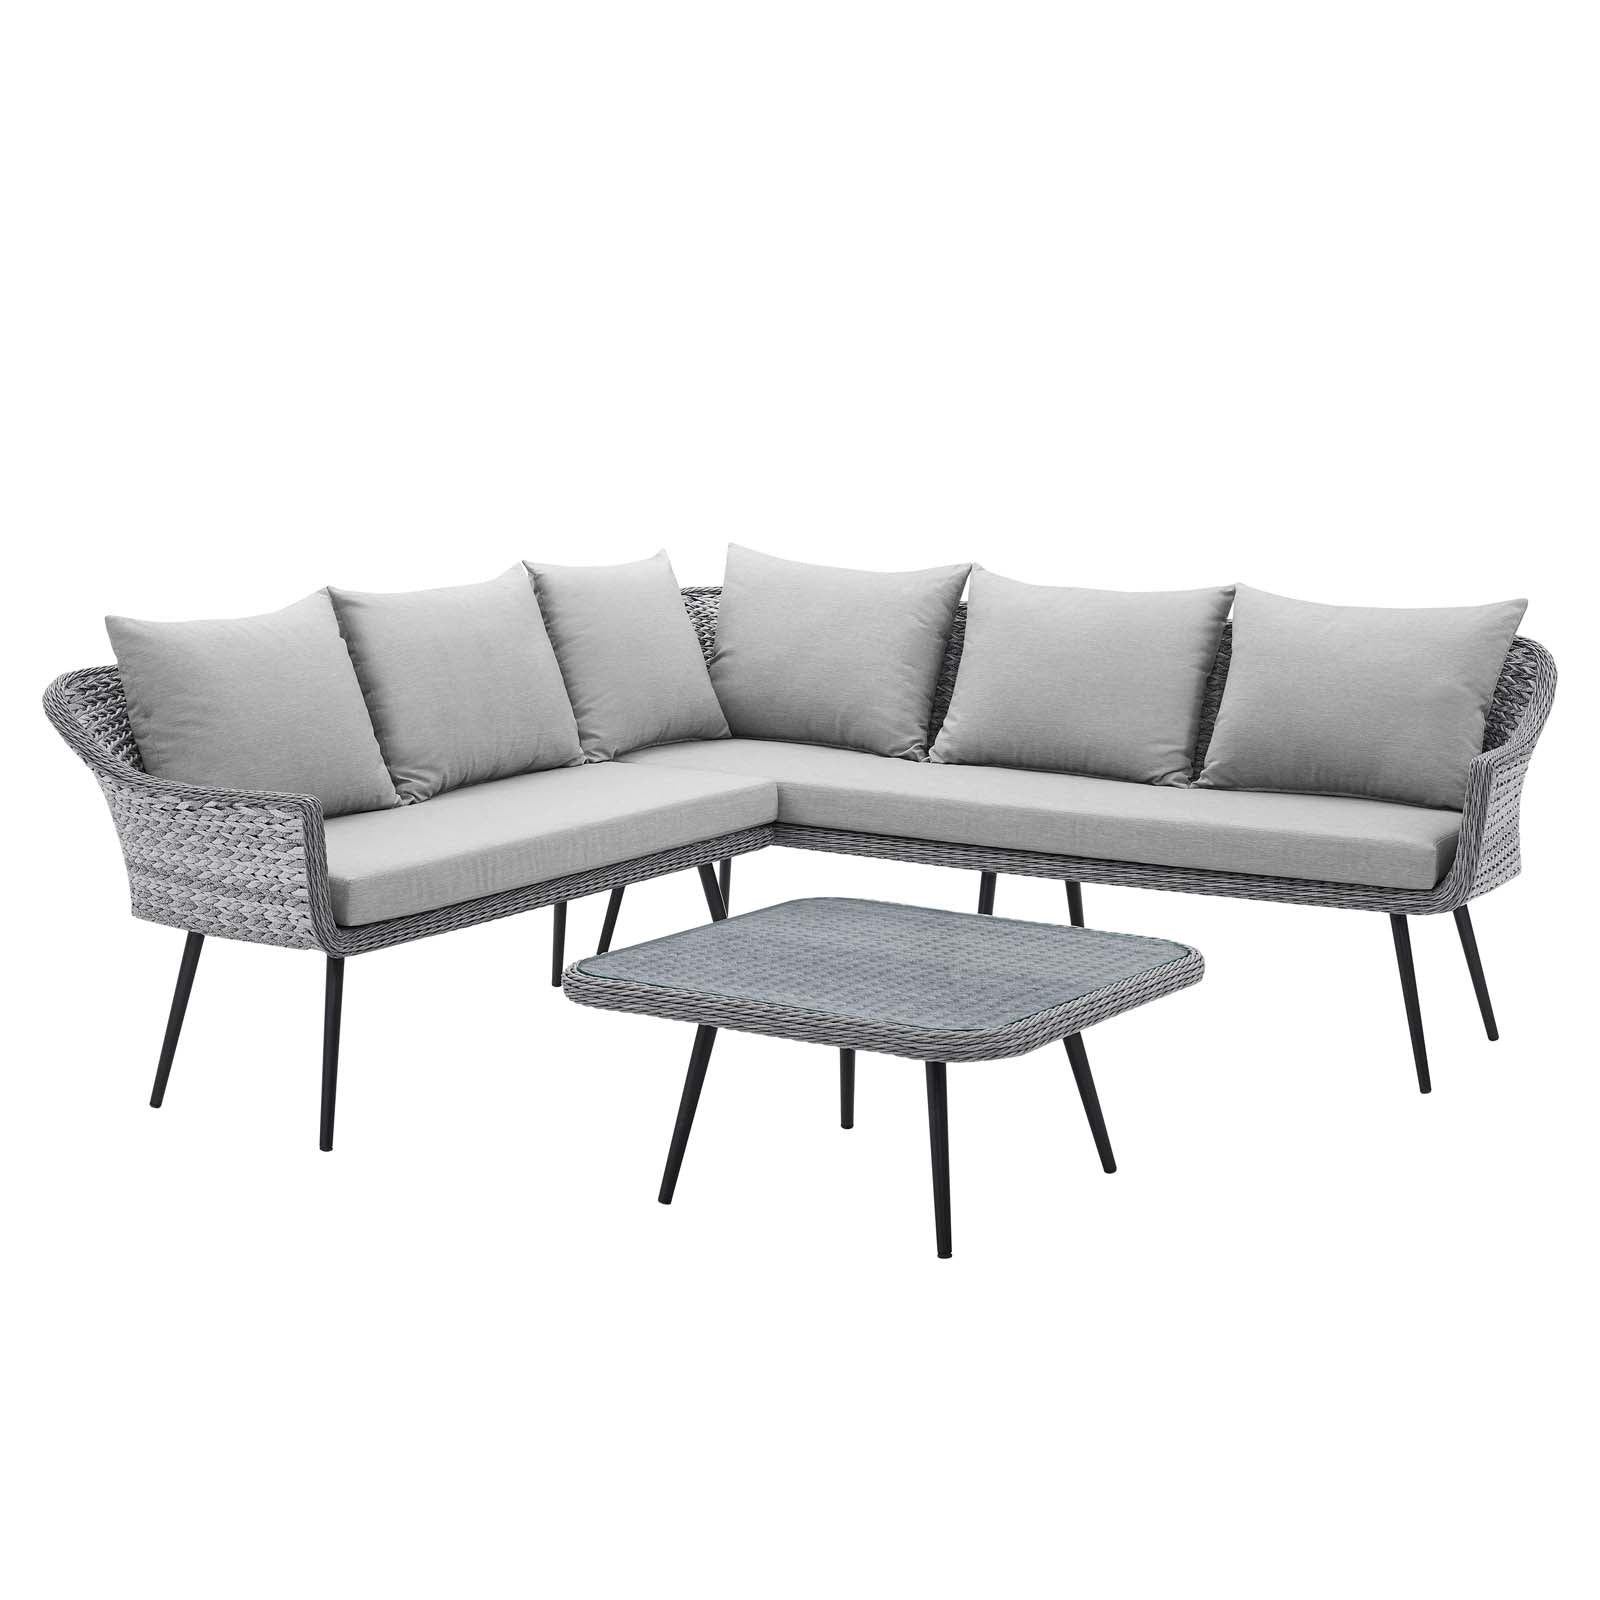 Modway Outdoor Conversation Sets - Endeavor Outdoor Patio Wicker Rattan Outdoor Patio Wicker Rattan Seating Set Gray